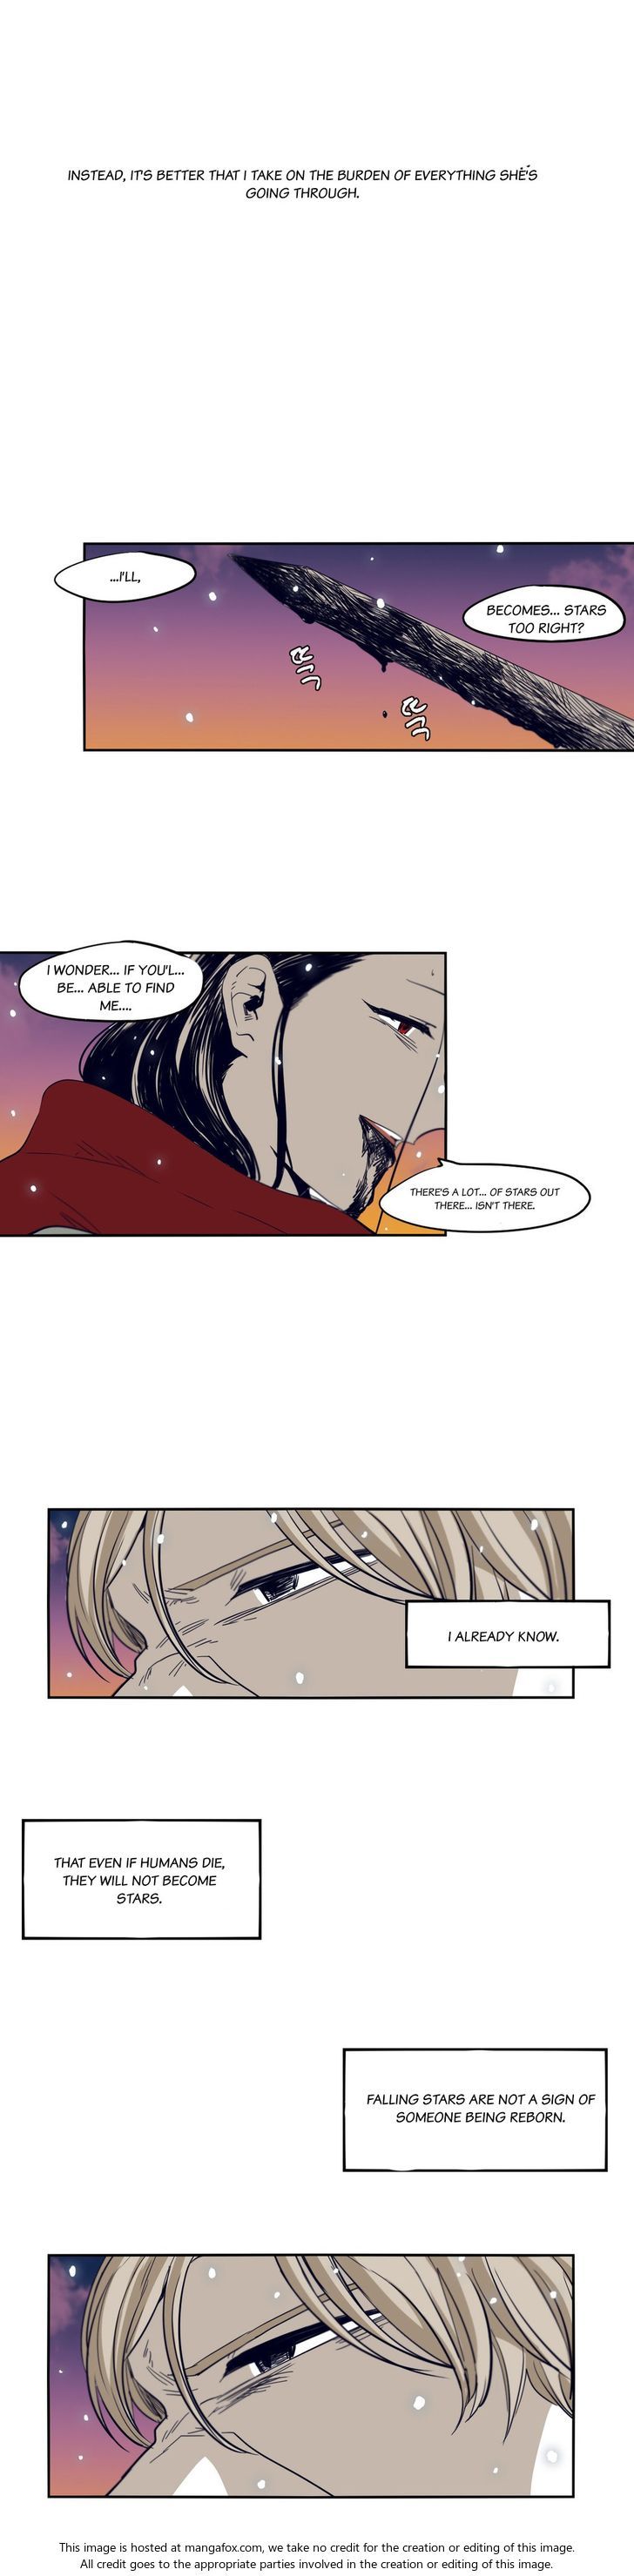 Epic of Gilgamesh Chapter 048 page 13